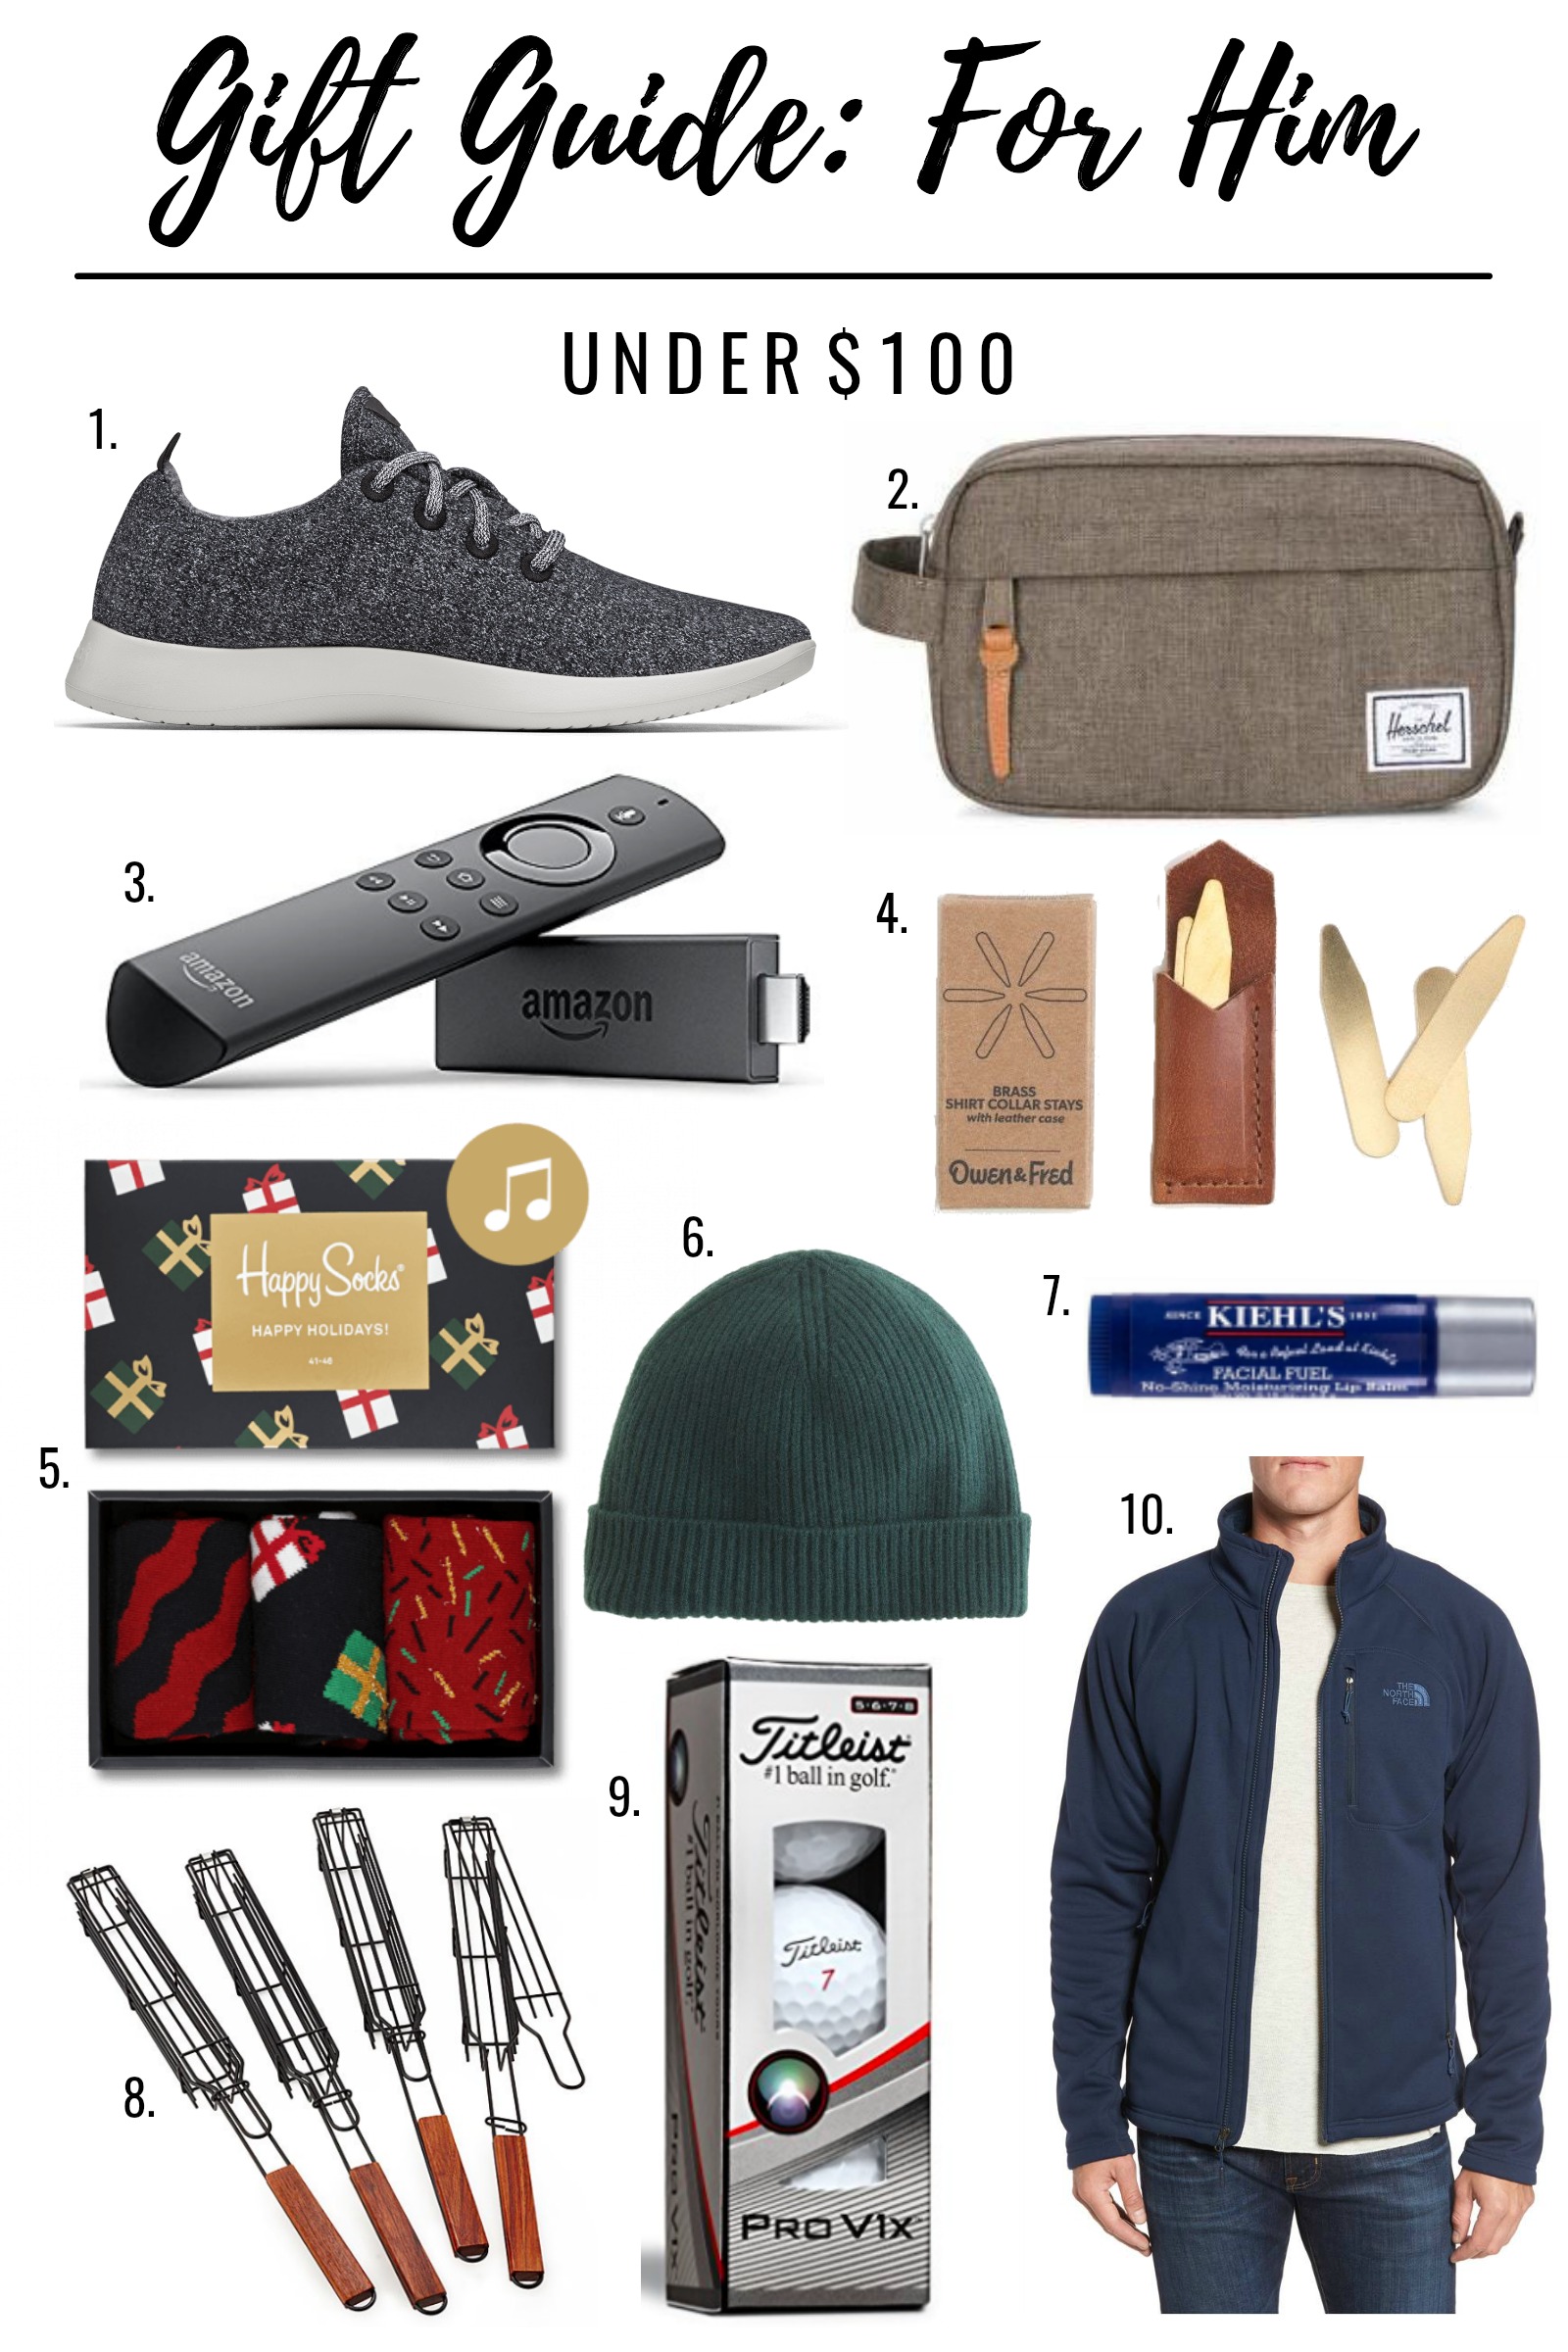 gift guide for him under $100